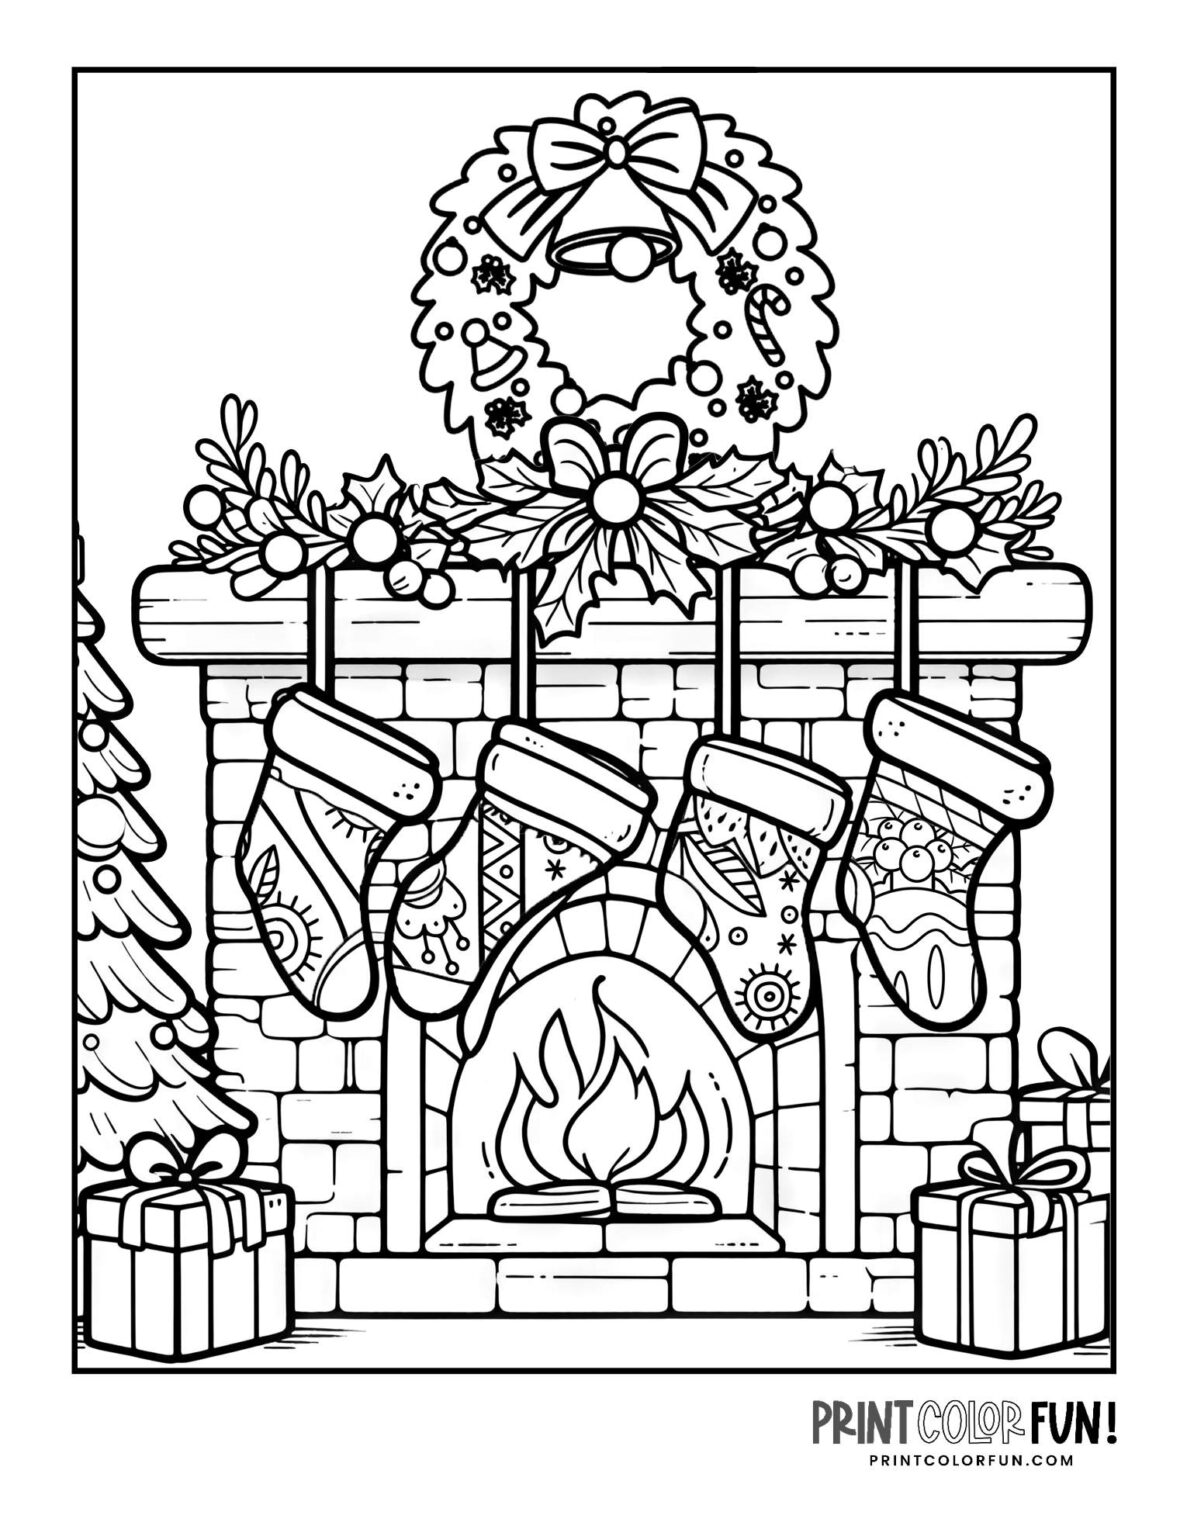 26 Christmas stocking clipart pages for easy craft & coloring fun for ...